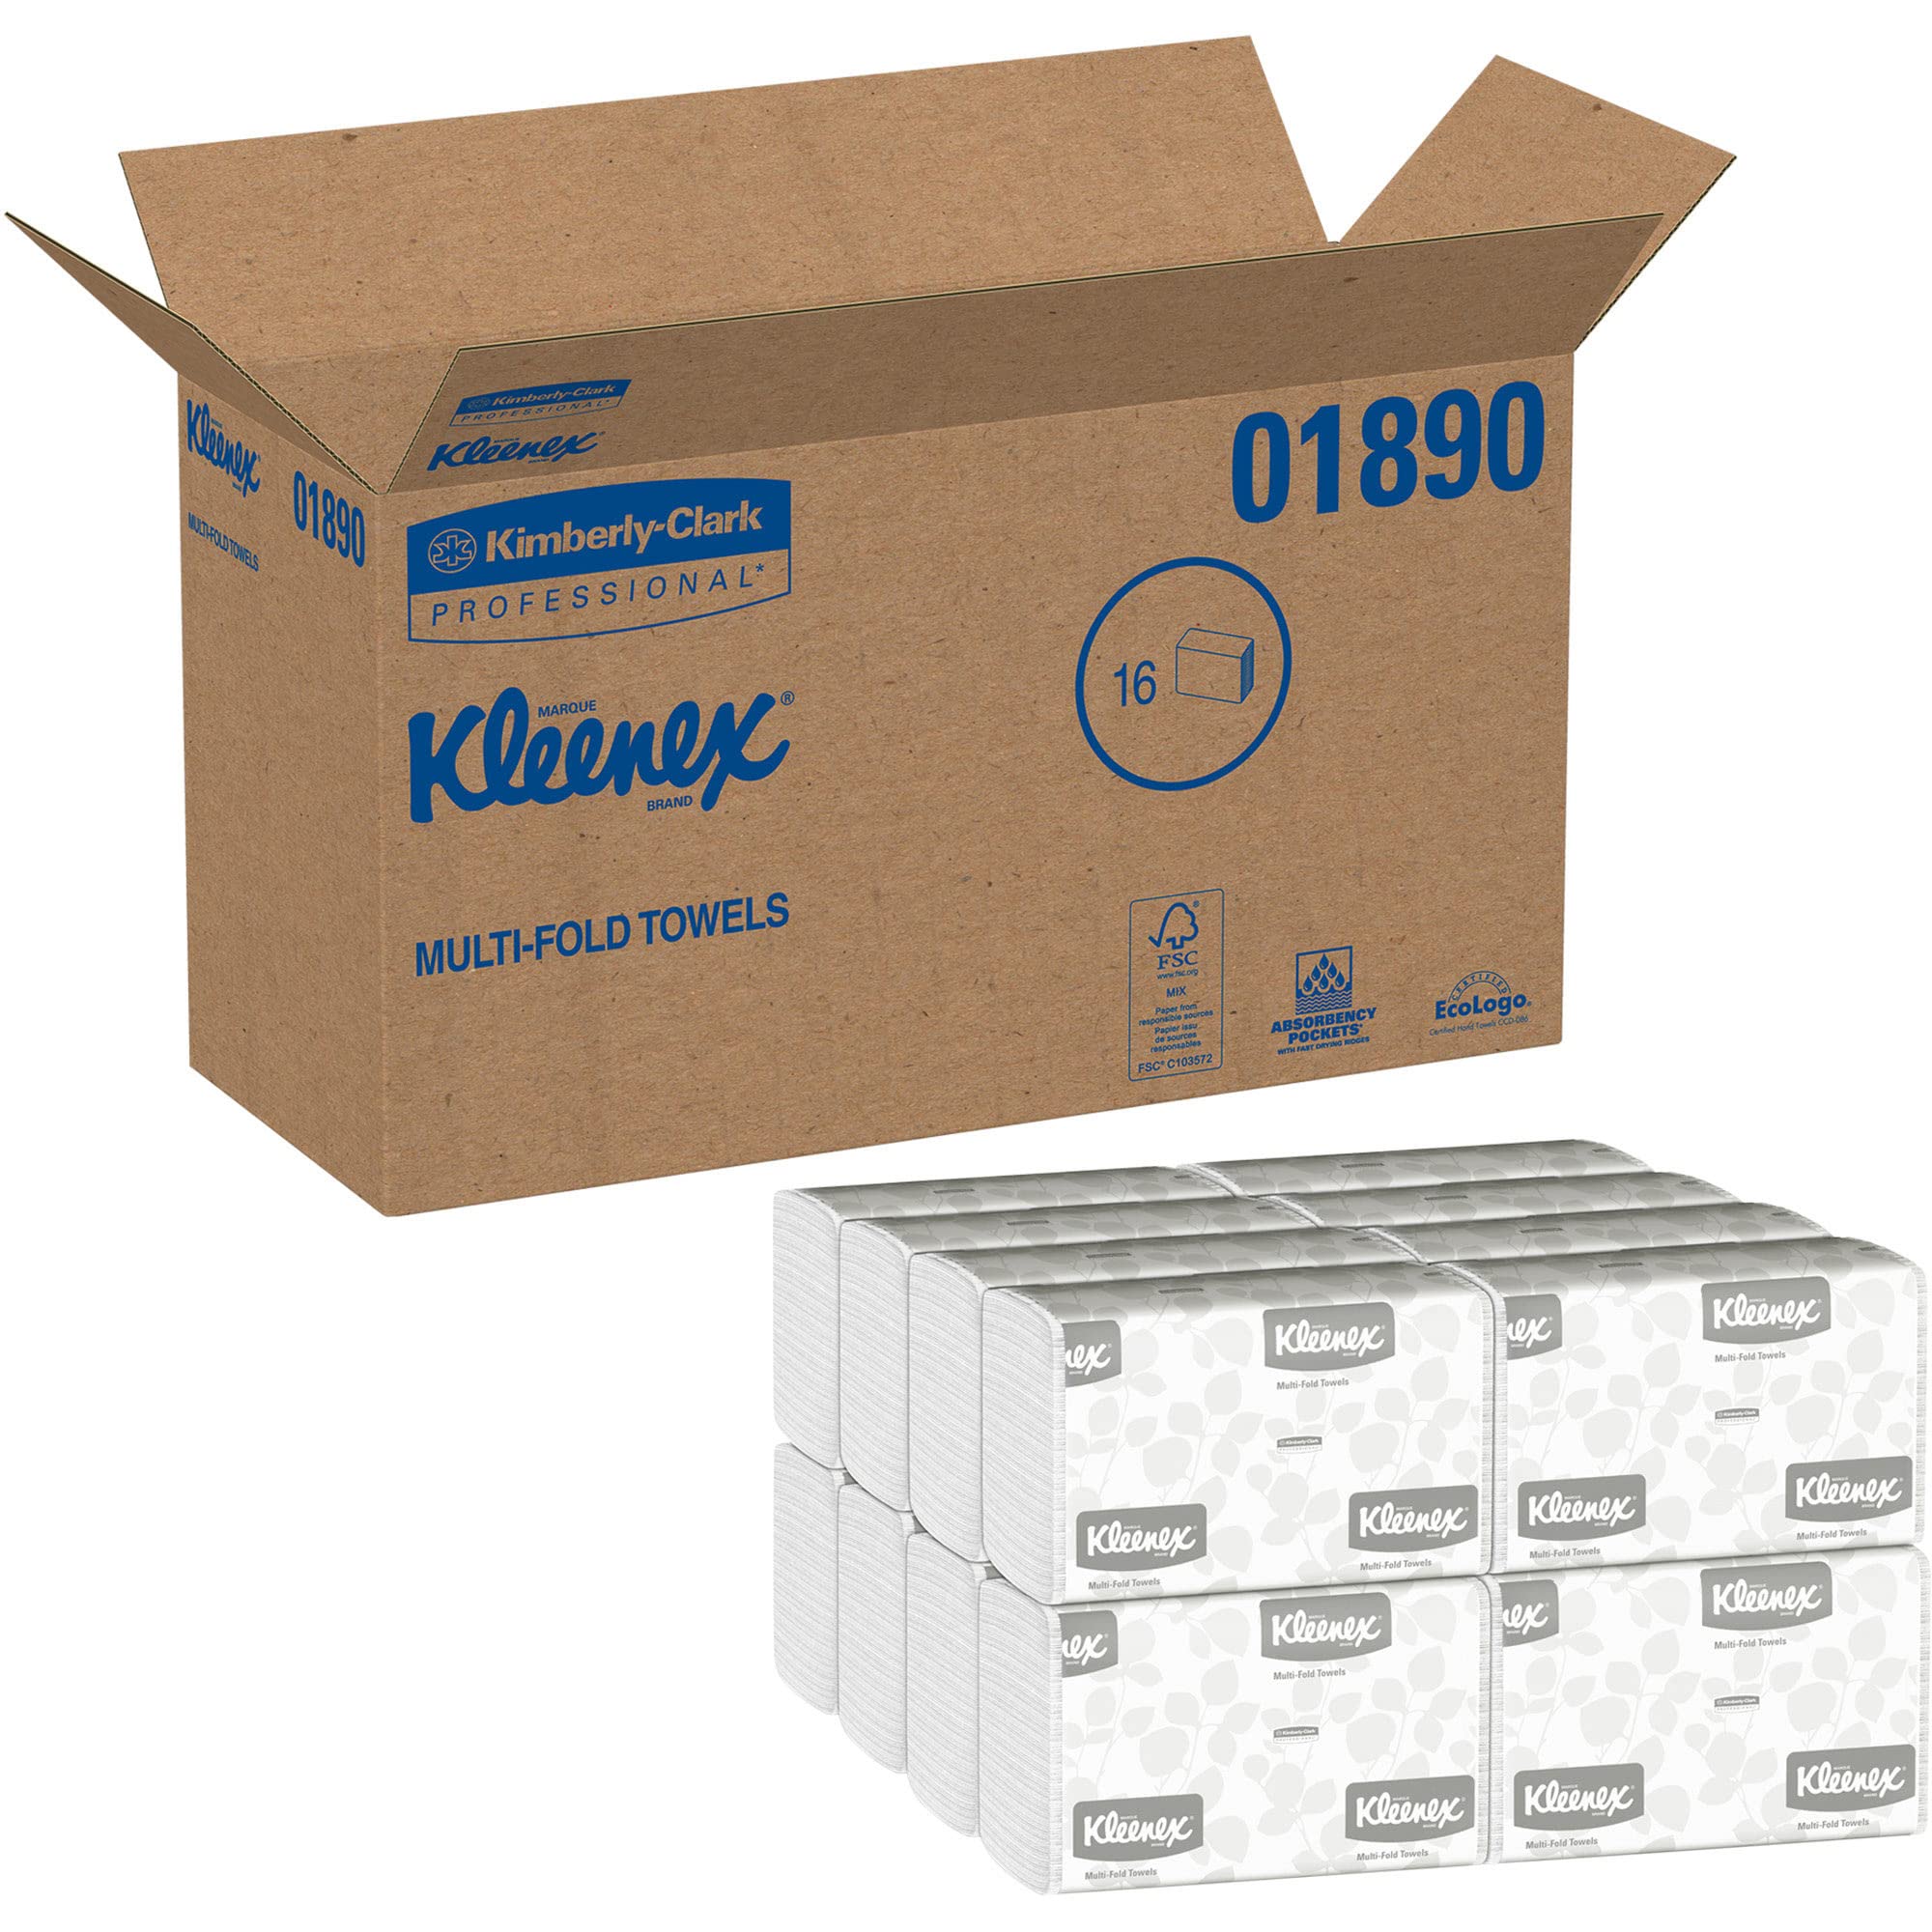 Kleenex® Multifold Paper Towels (01890), 1-Ply, 9.2" x 9.4" sheets, White, (150 Sheets/Pack, 16 Packs/Case, 2400 Sheets/Case)